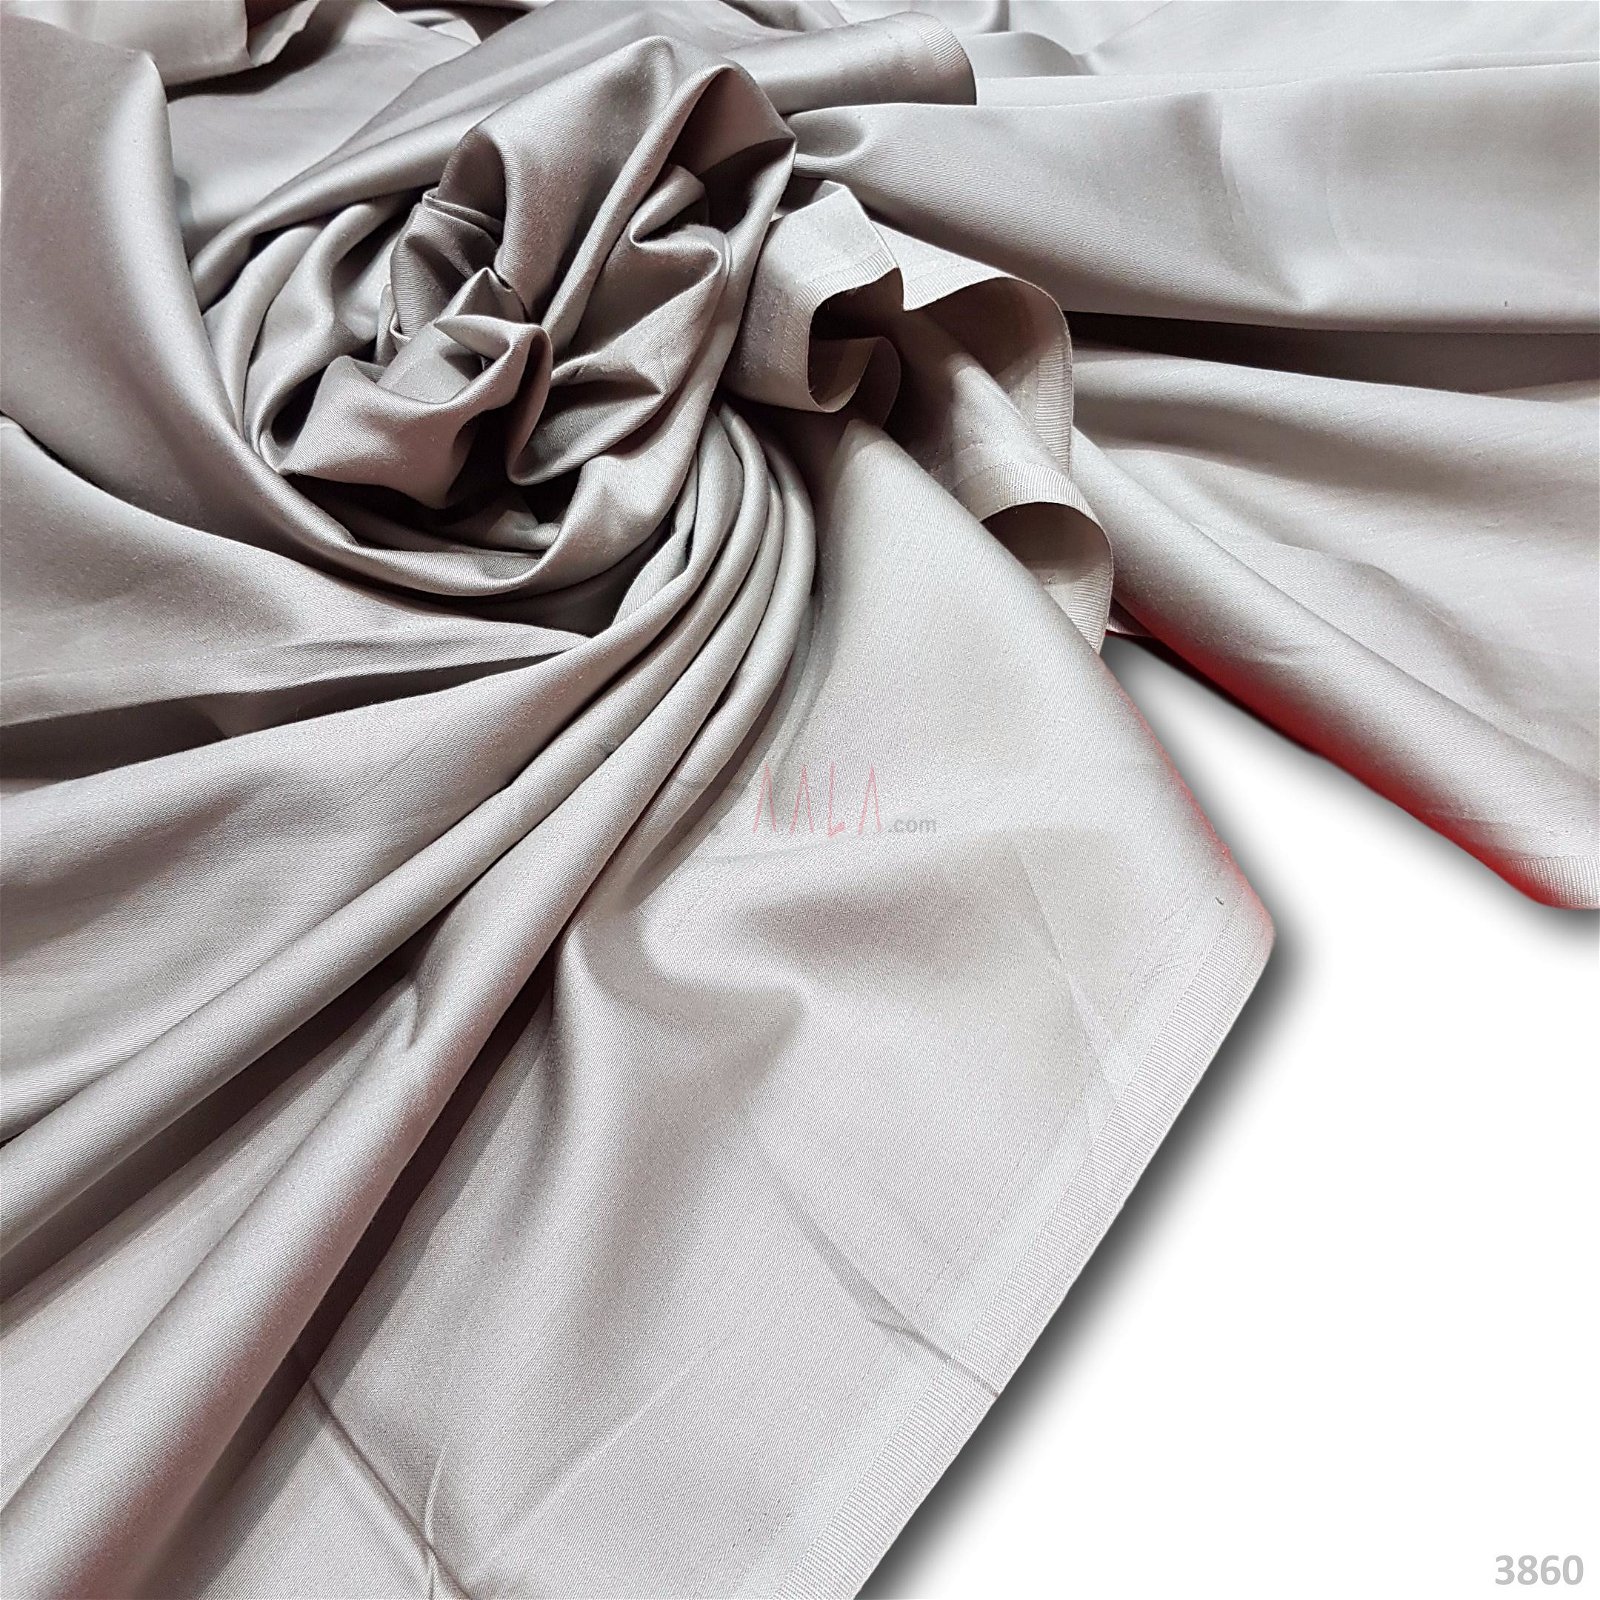 Satin Cotton 44 Inches Dyed Per Metre #3860